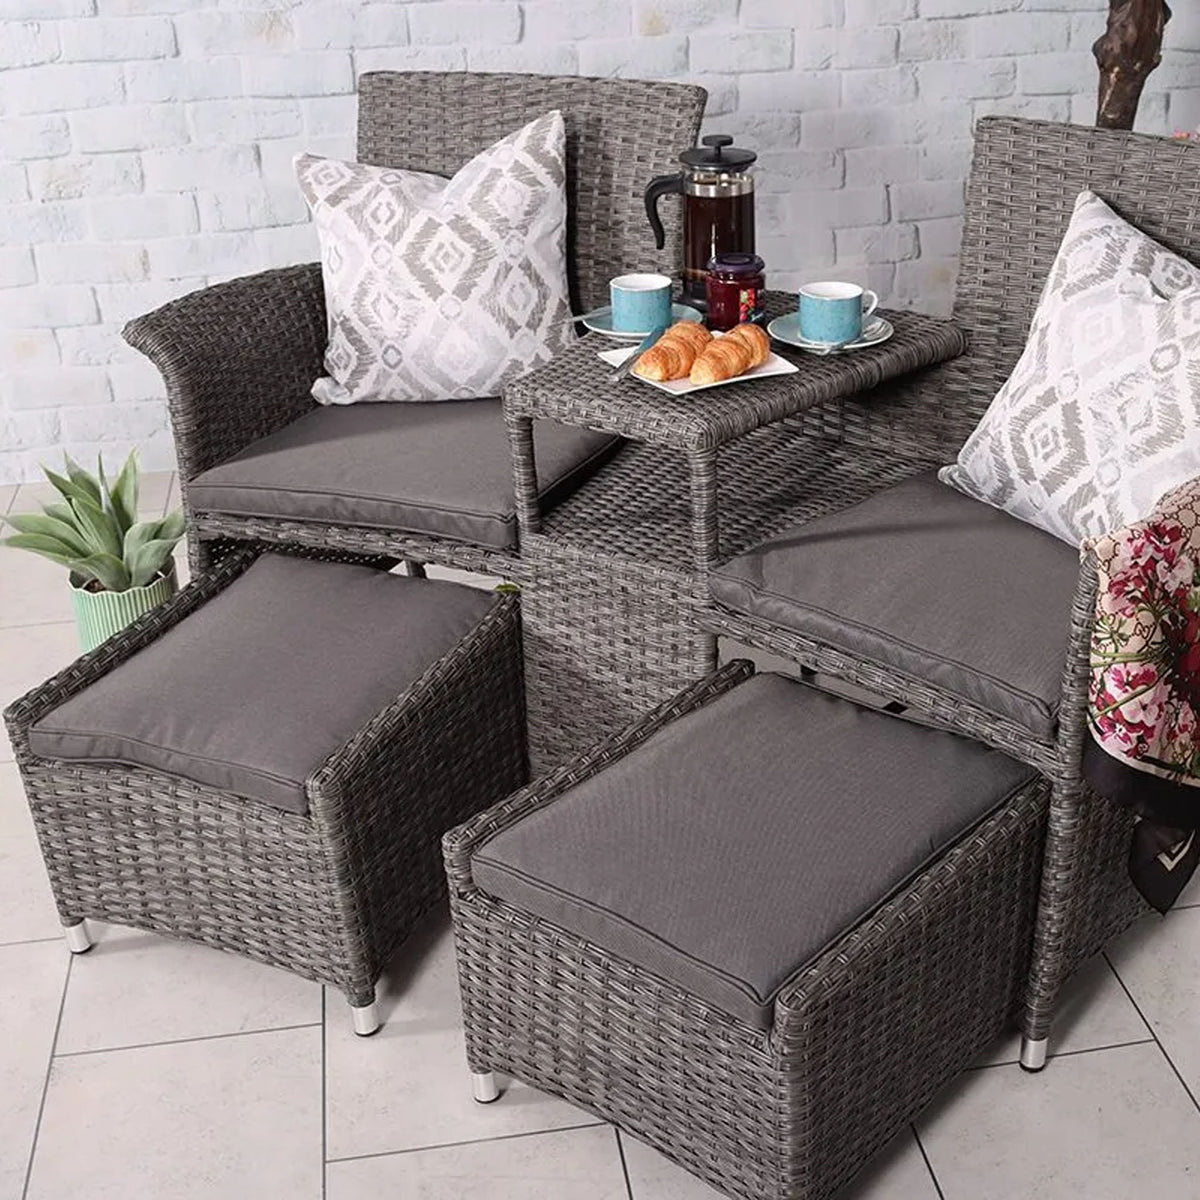 Paris Deluxe Rattan Companion Love Seat Set Table and Chairs